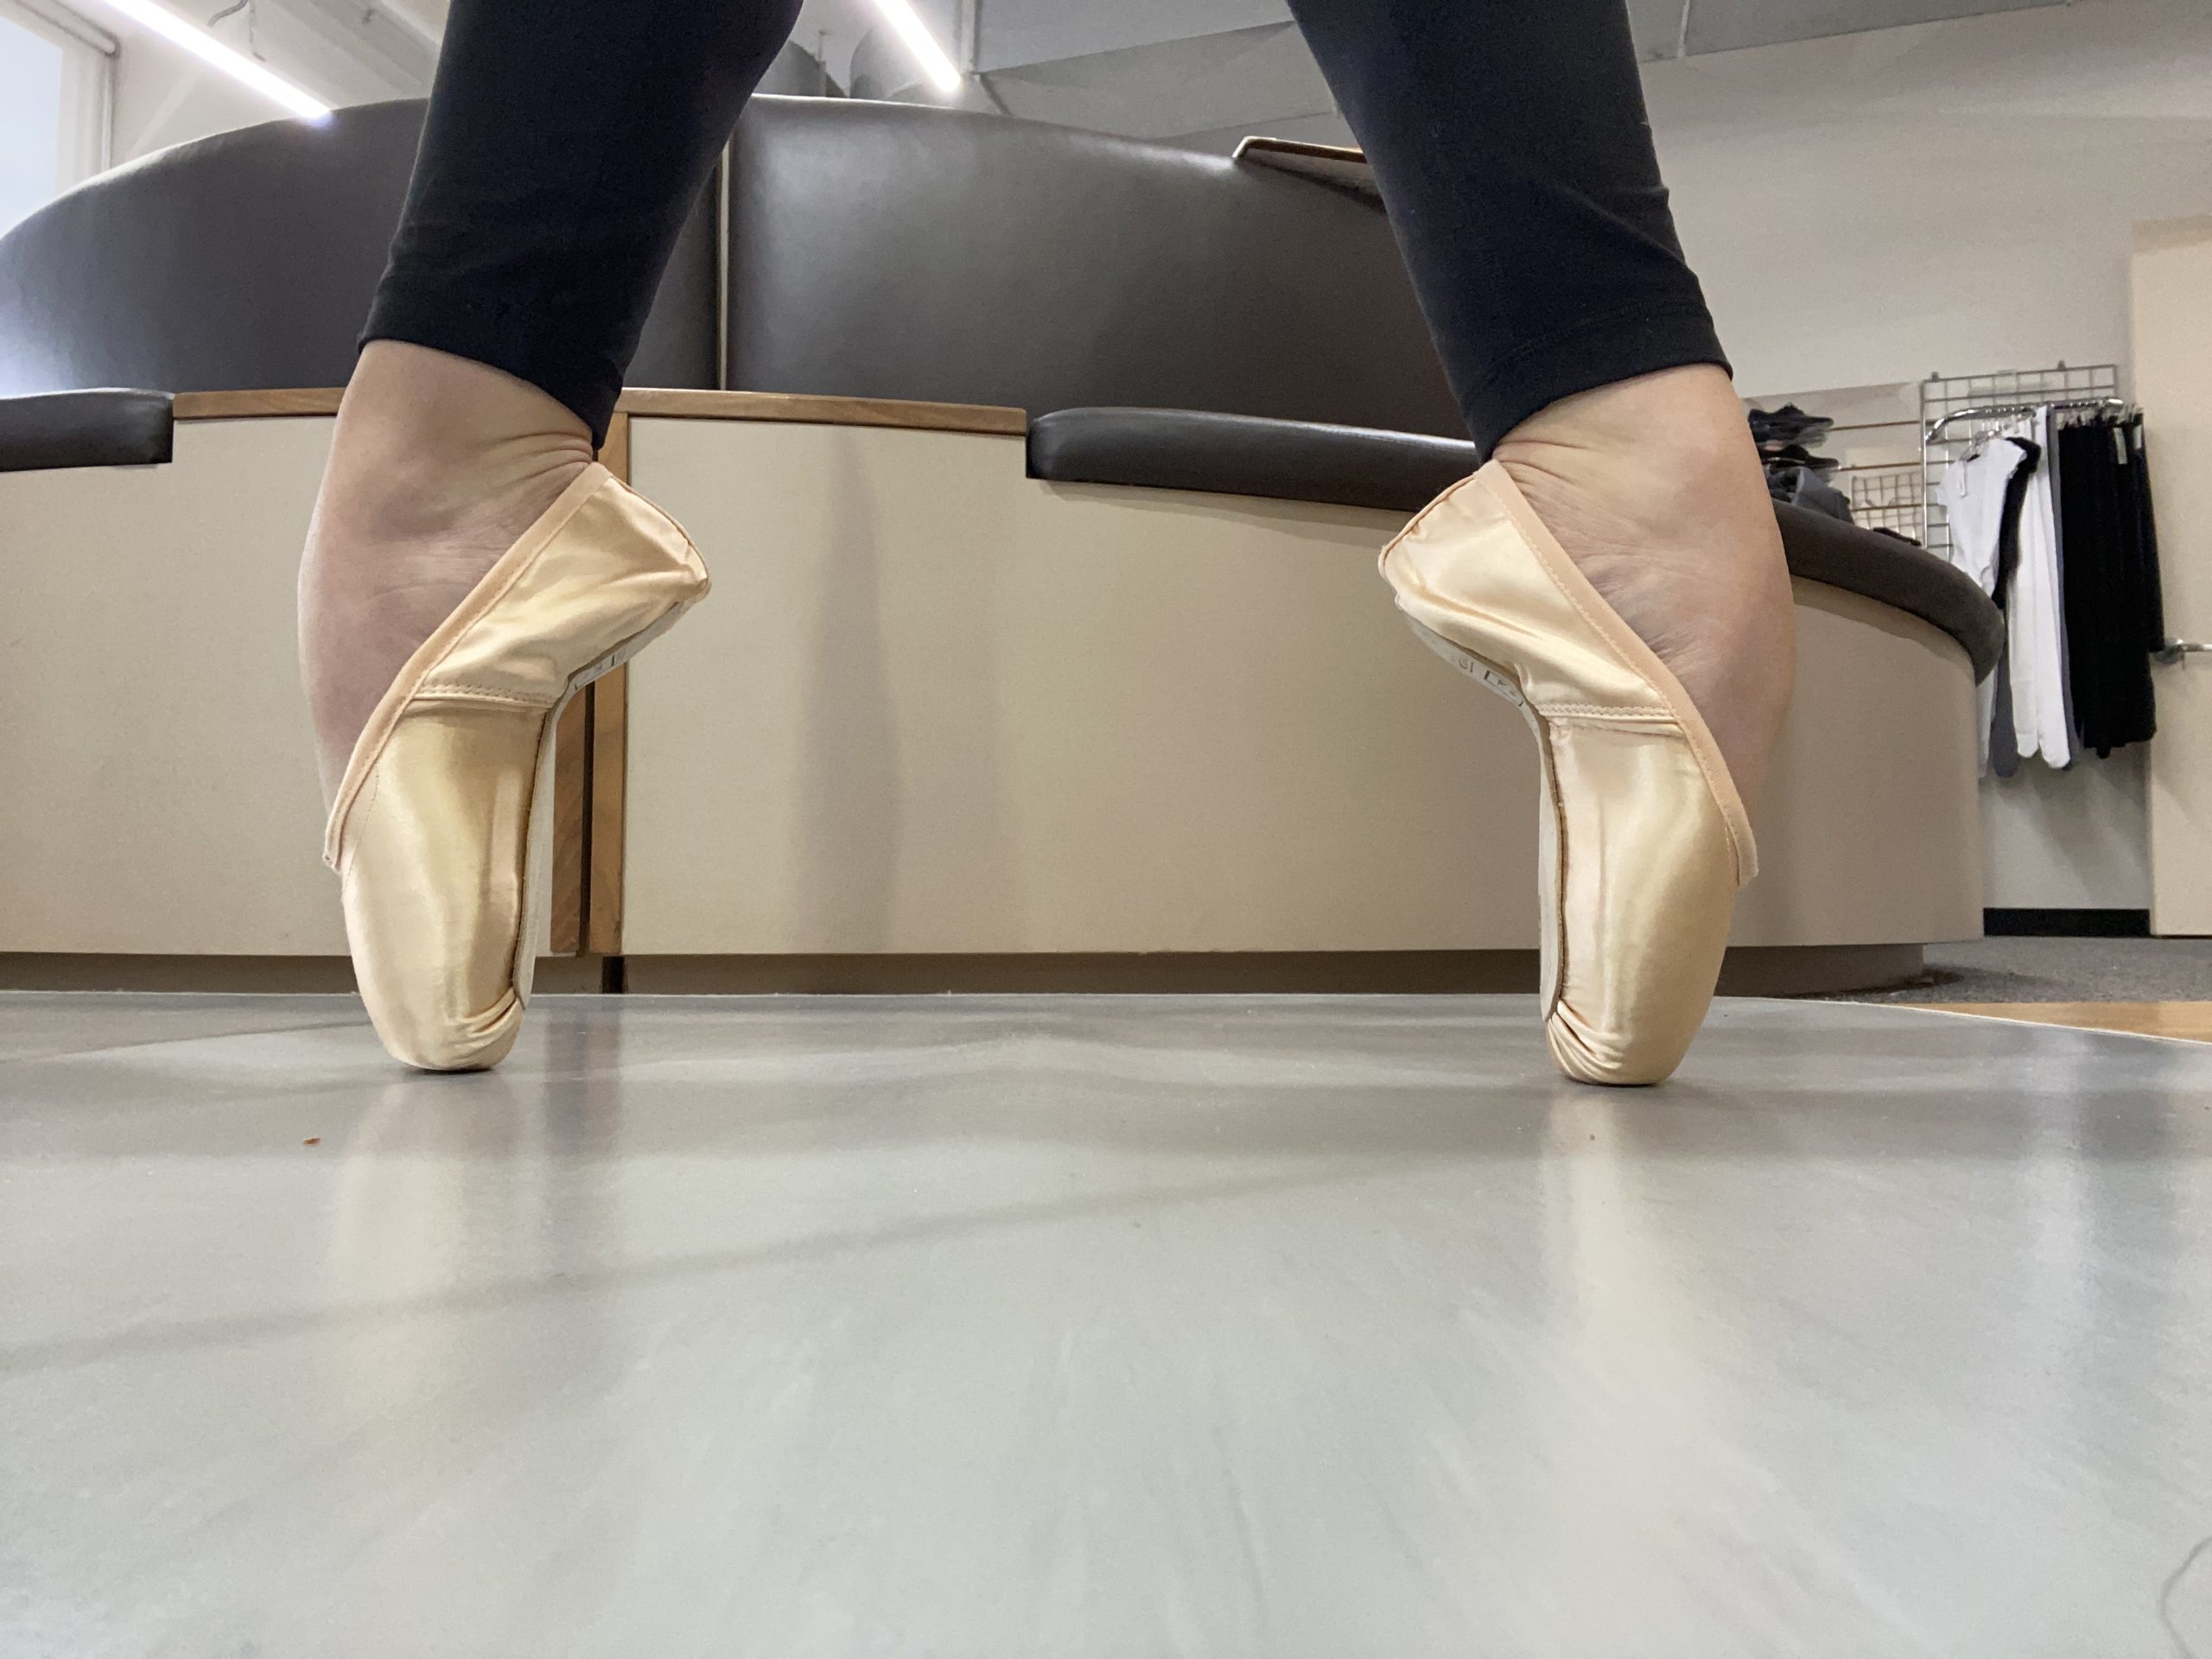 Two feet stand on pointe in second positon